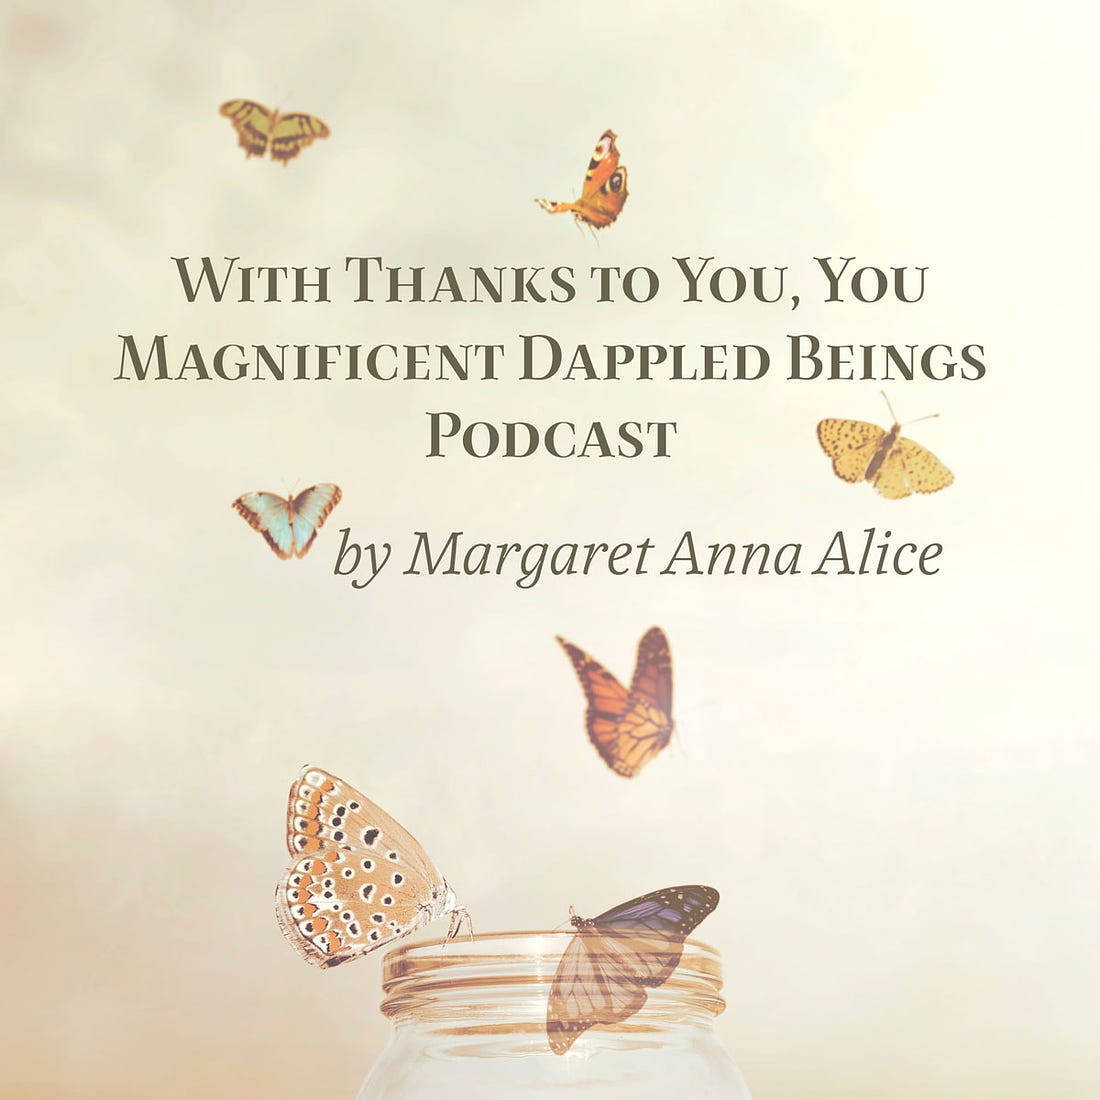 With Thanks to You, You Magnificent Dappled Beings Podcast Cover Artwork; Butterflies Being Released from Mason Jar